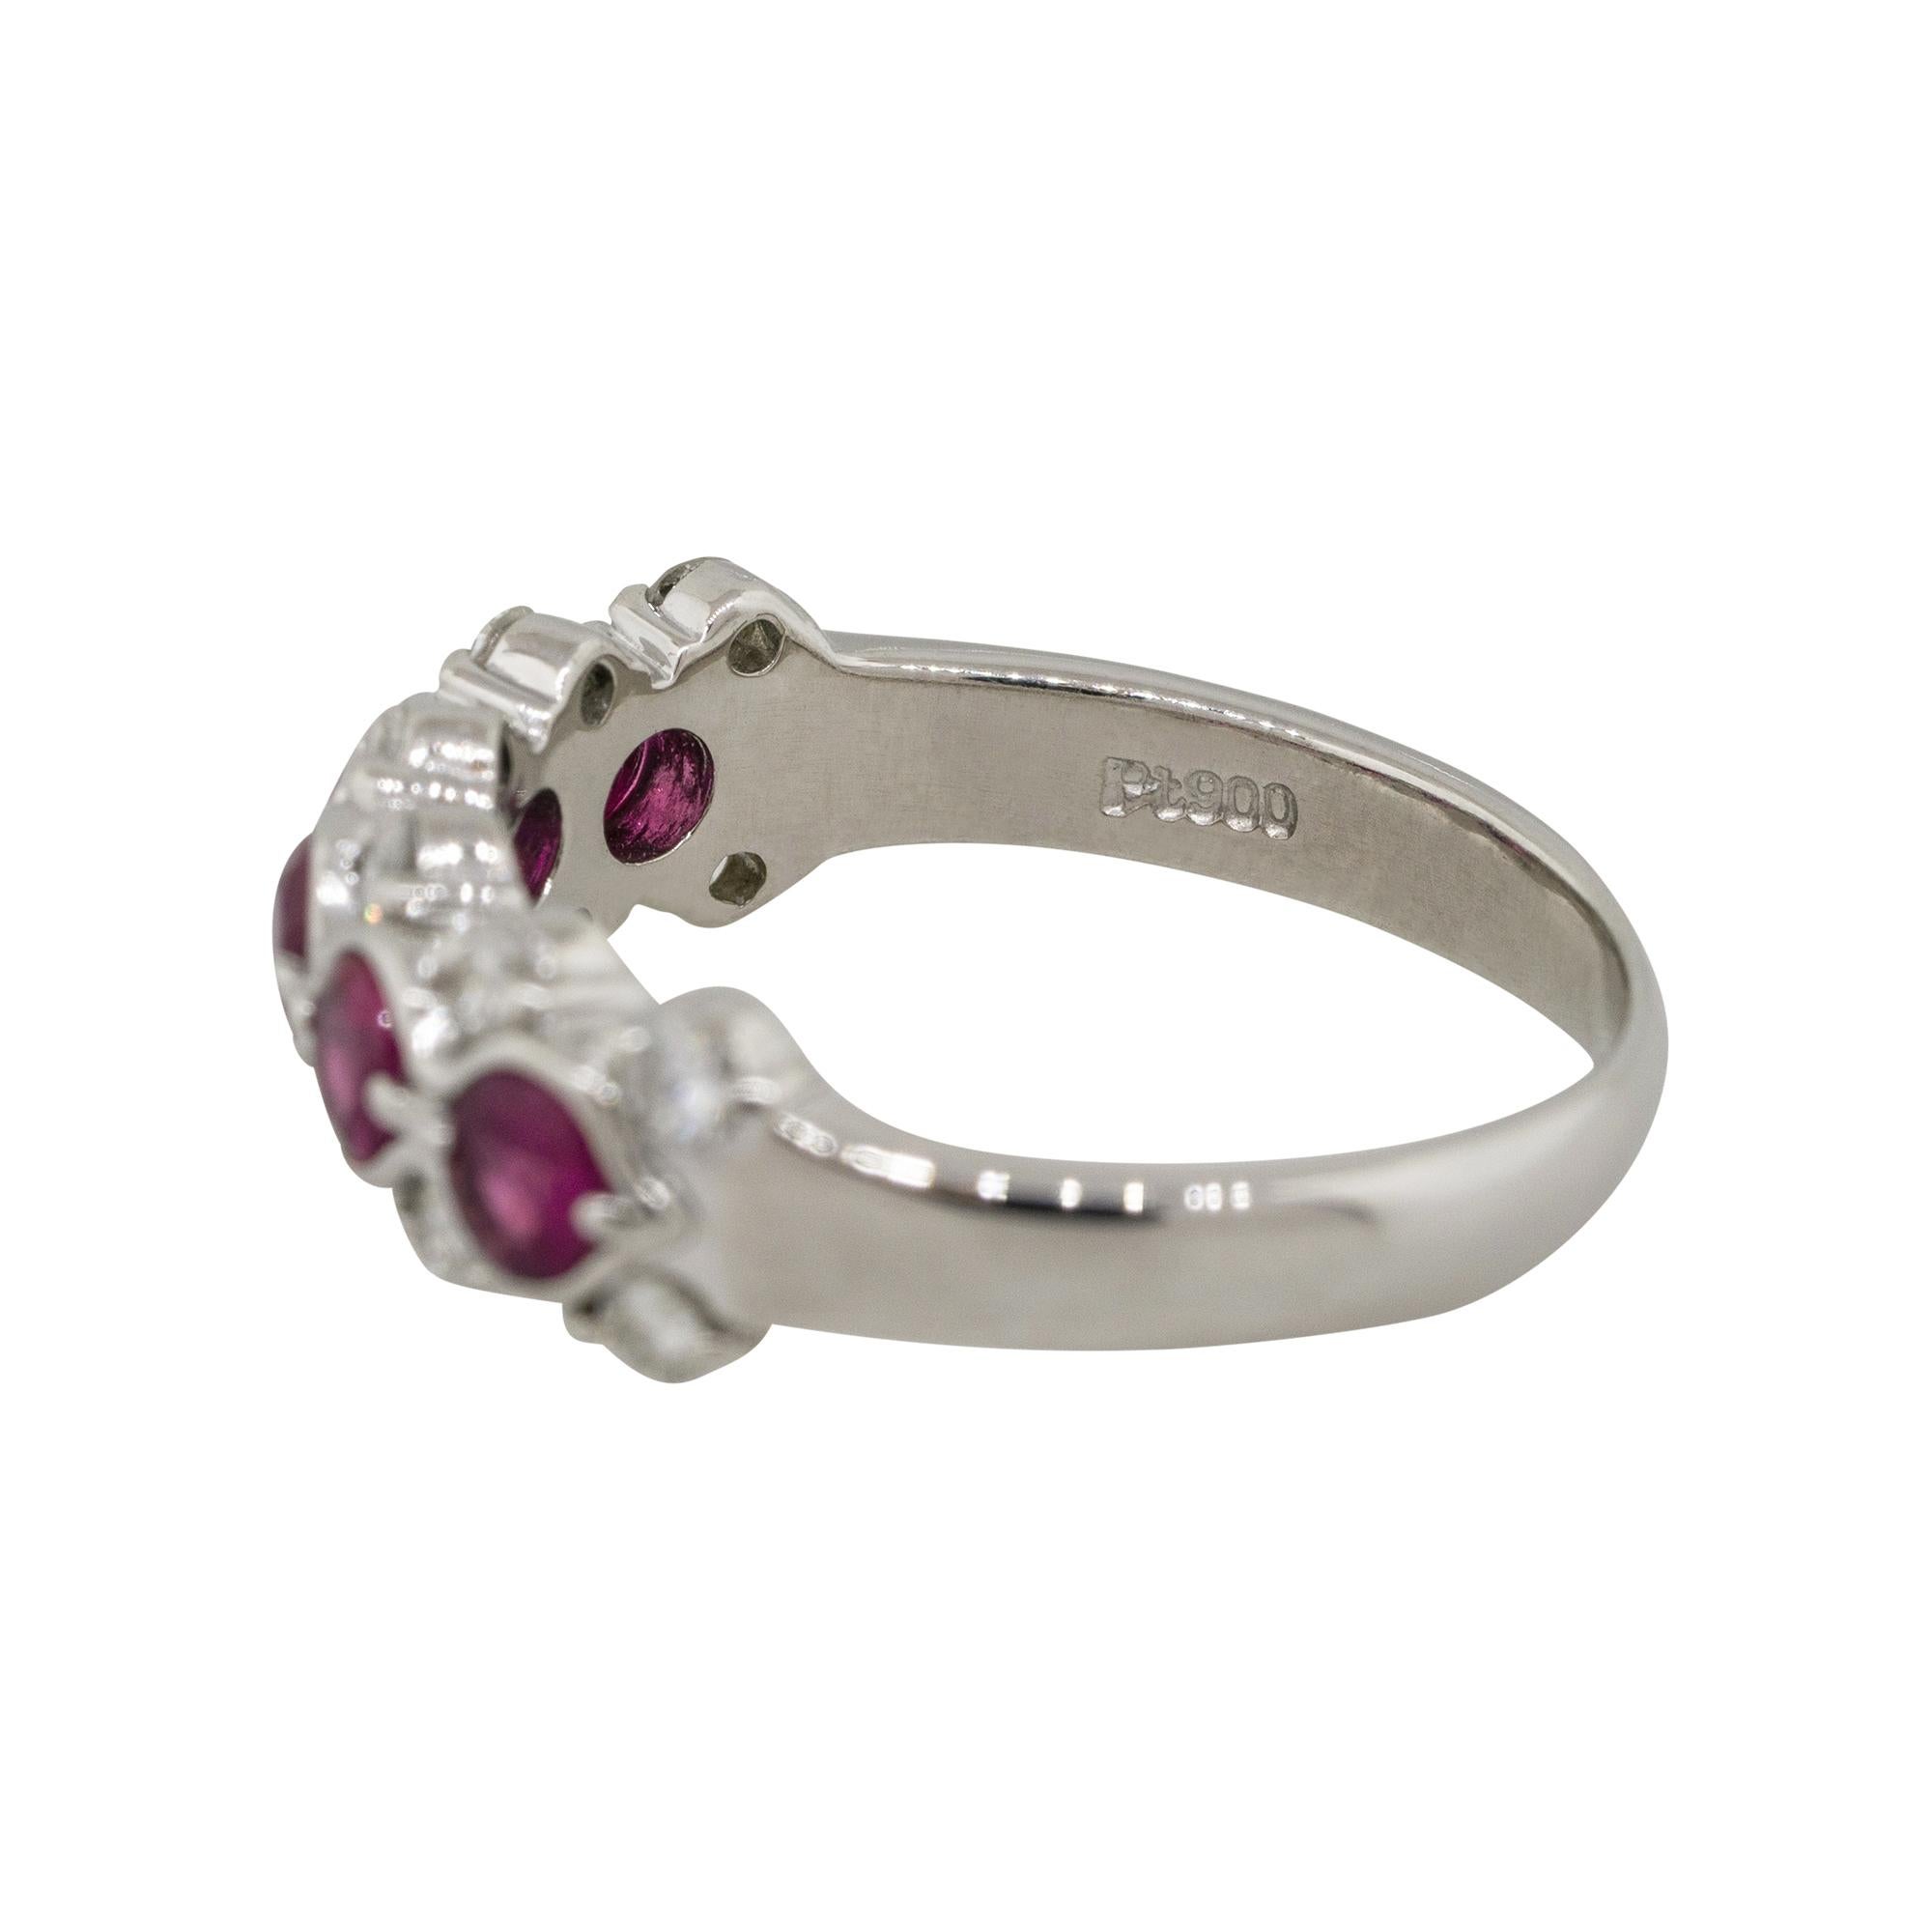 0.75 Carat Round Ruby Bezel Set Diamond Ring Platinum in Stock In New Condition For Sale In Boca Raton, FL